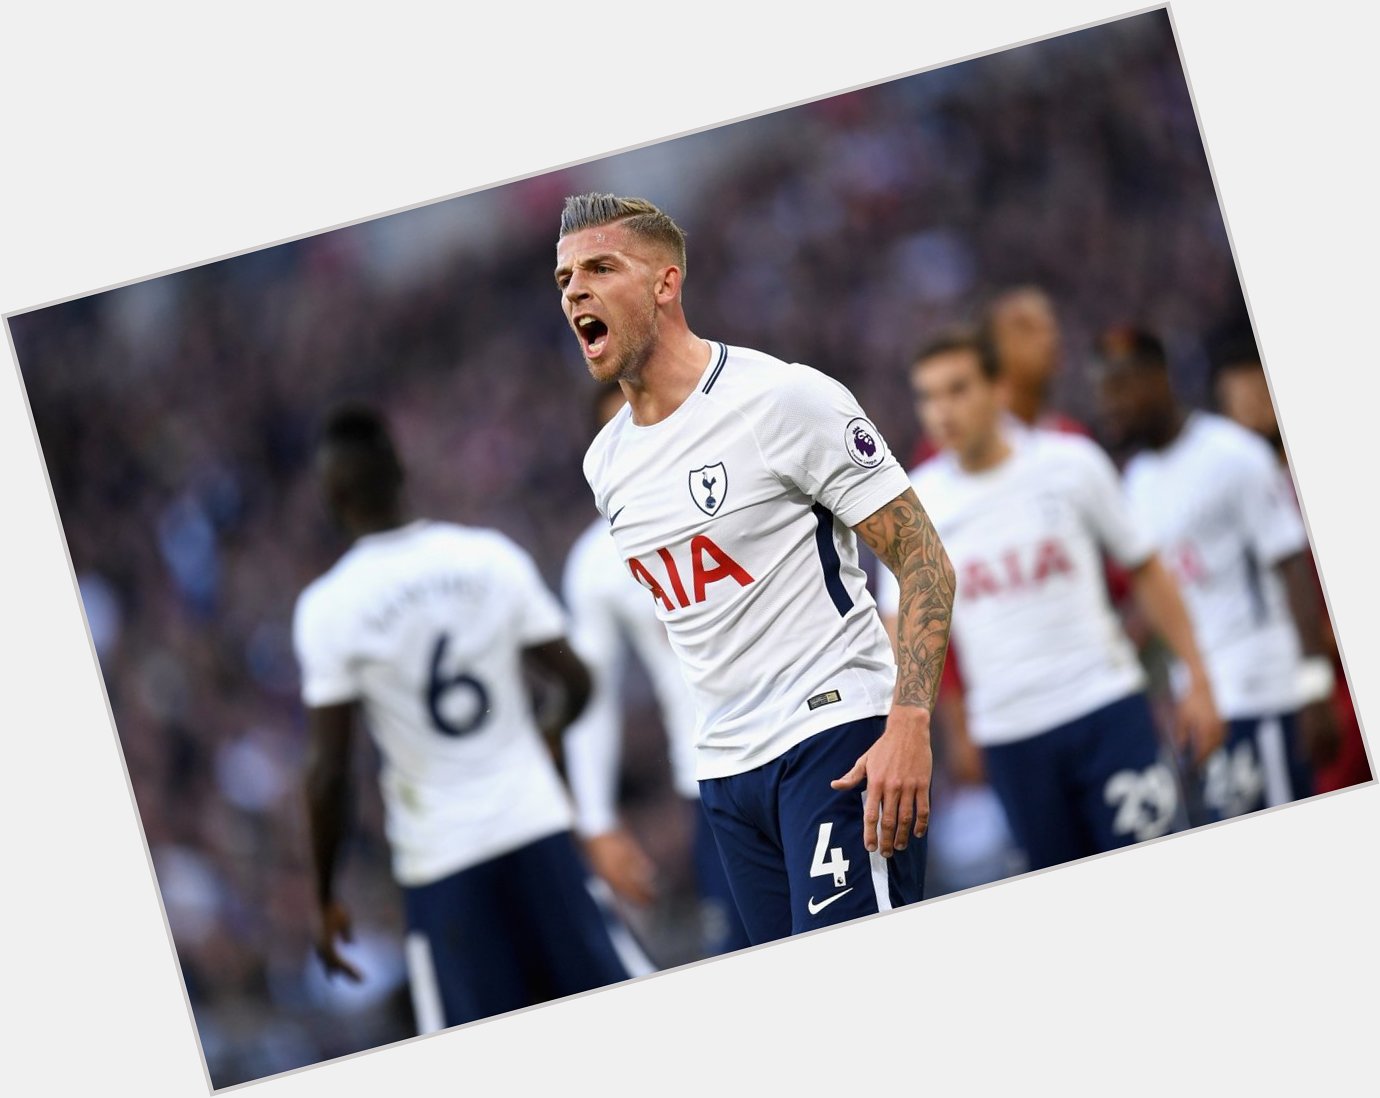  Happy Birthday Toby Alderweireld! If Tottenham were to sell him this summer, would you take him at your club? 